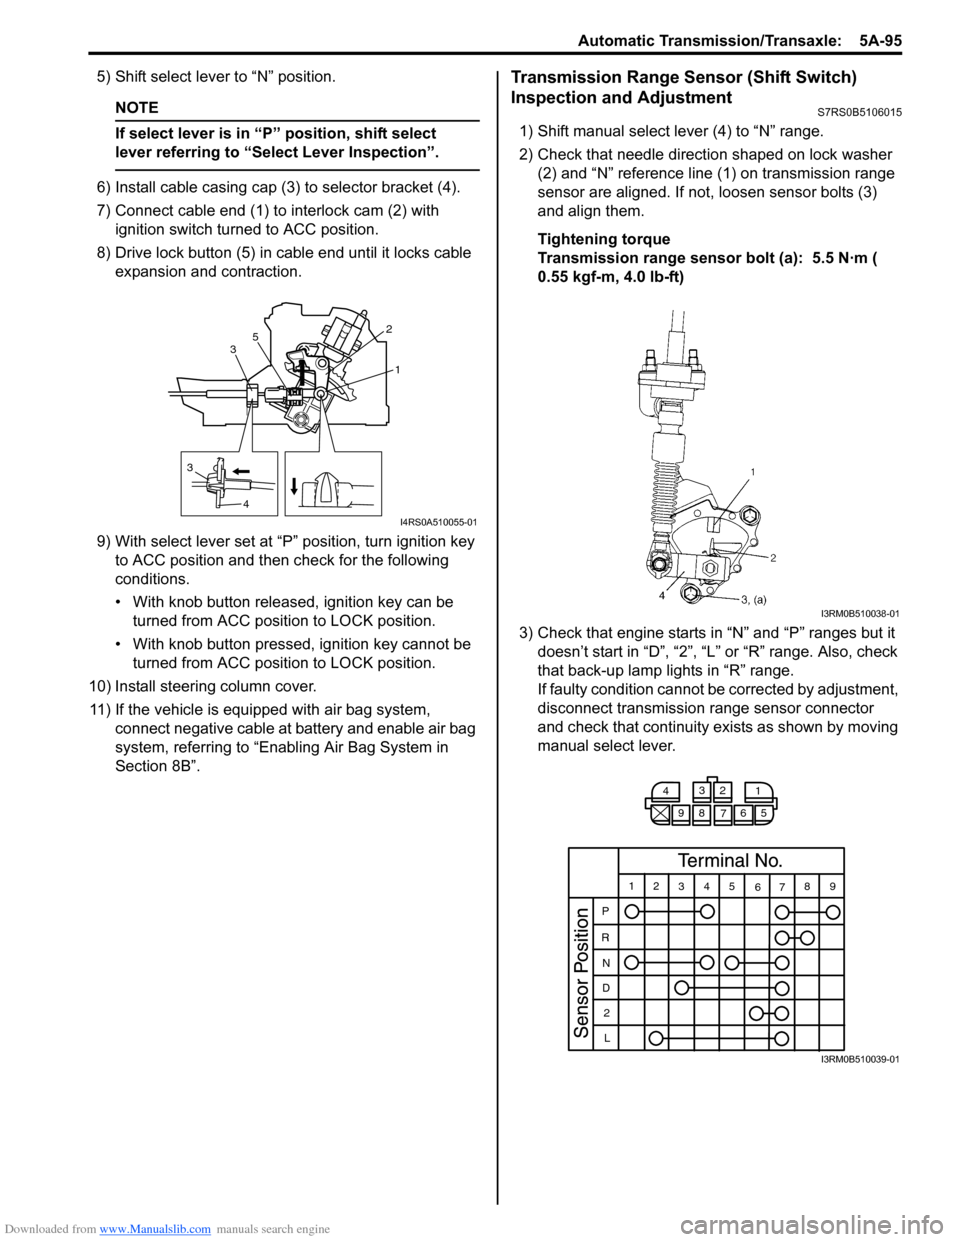 SUZUKI SWIFT 2007 2.G Service Workshop Manual Downloaded from www.Manualslib.com manuals search engine Automatic Transmission/Transaxle:  5A-95
5) Shift select lever to “N” position.
NOTE
If select lever is in “P” position, shift select 
